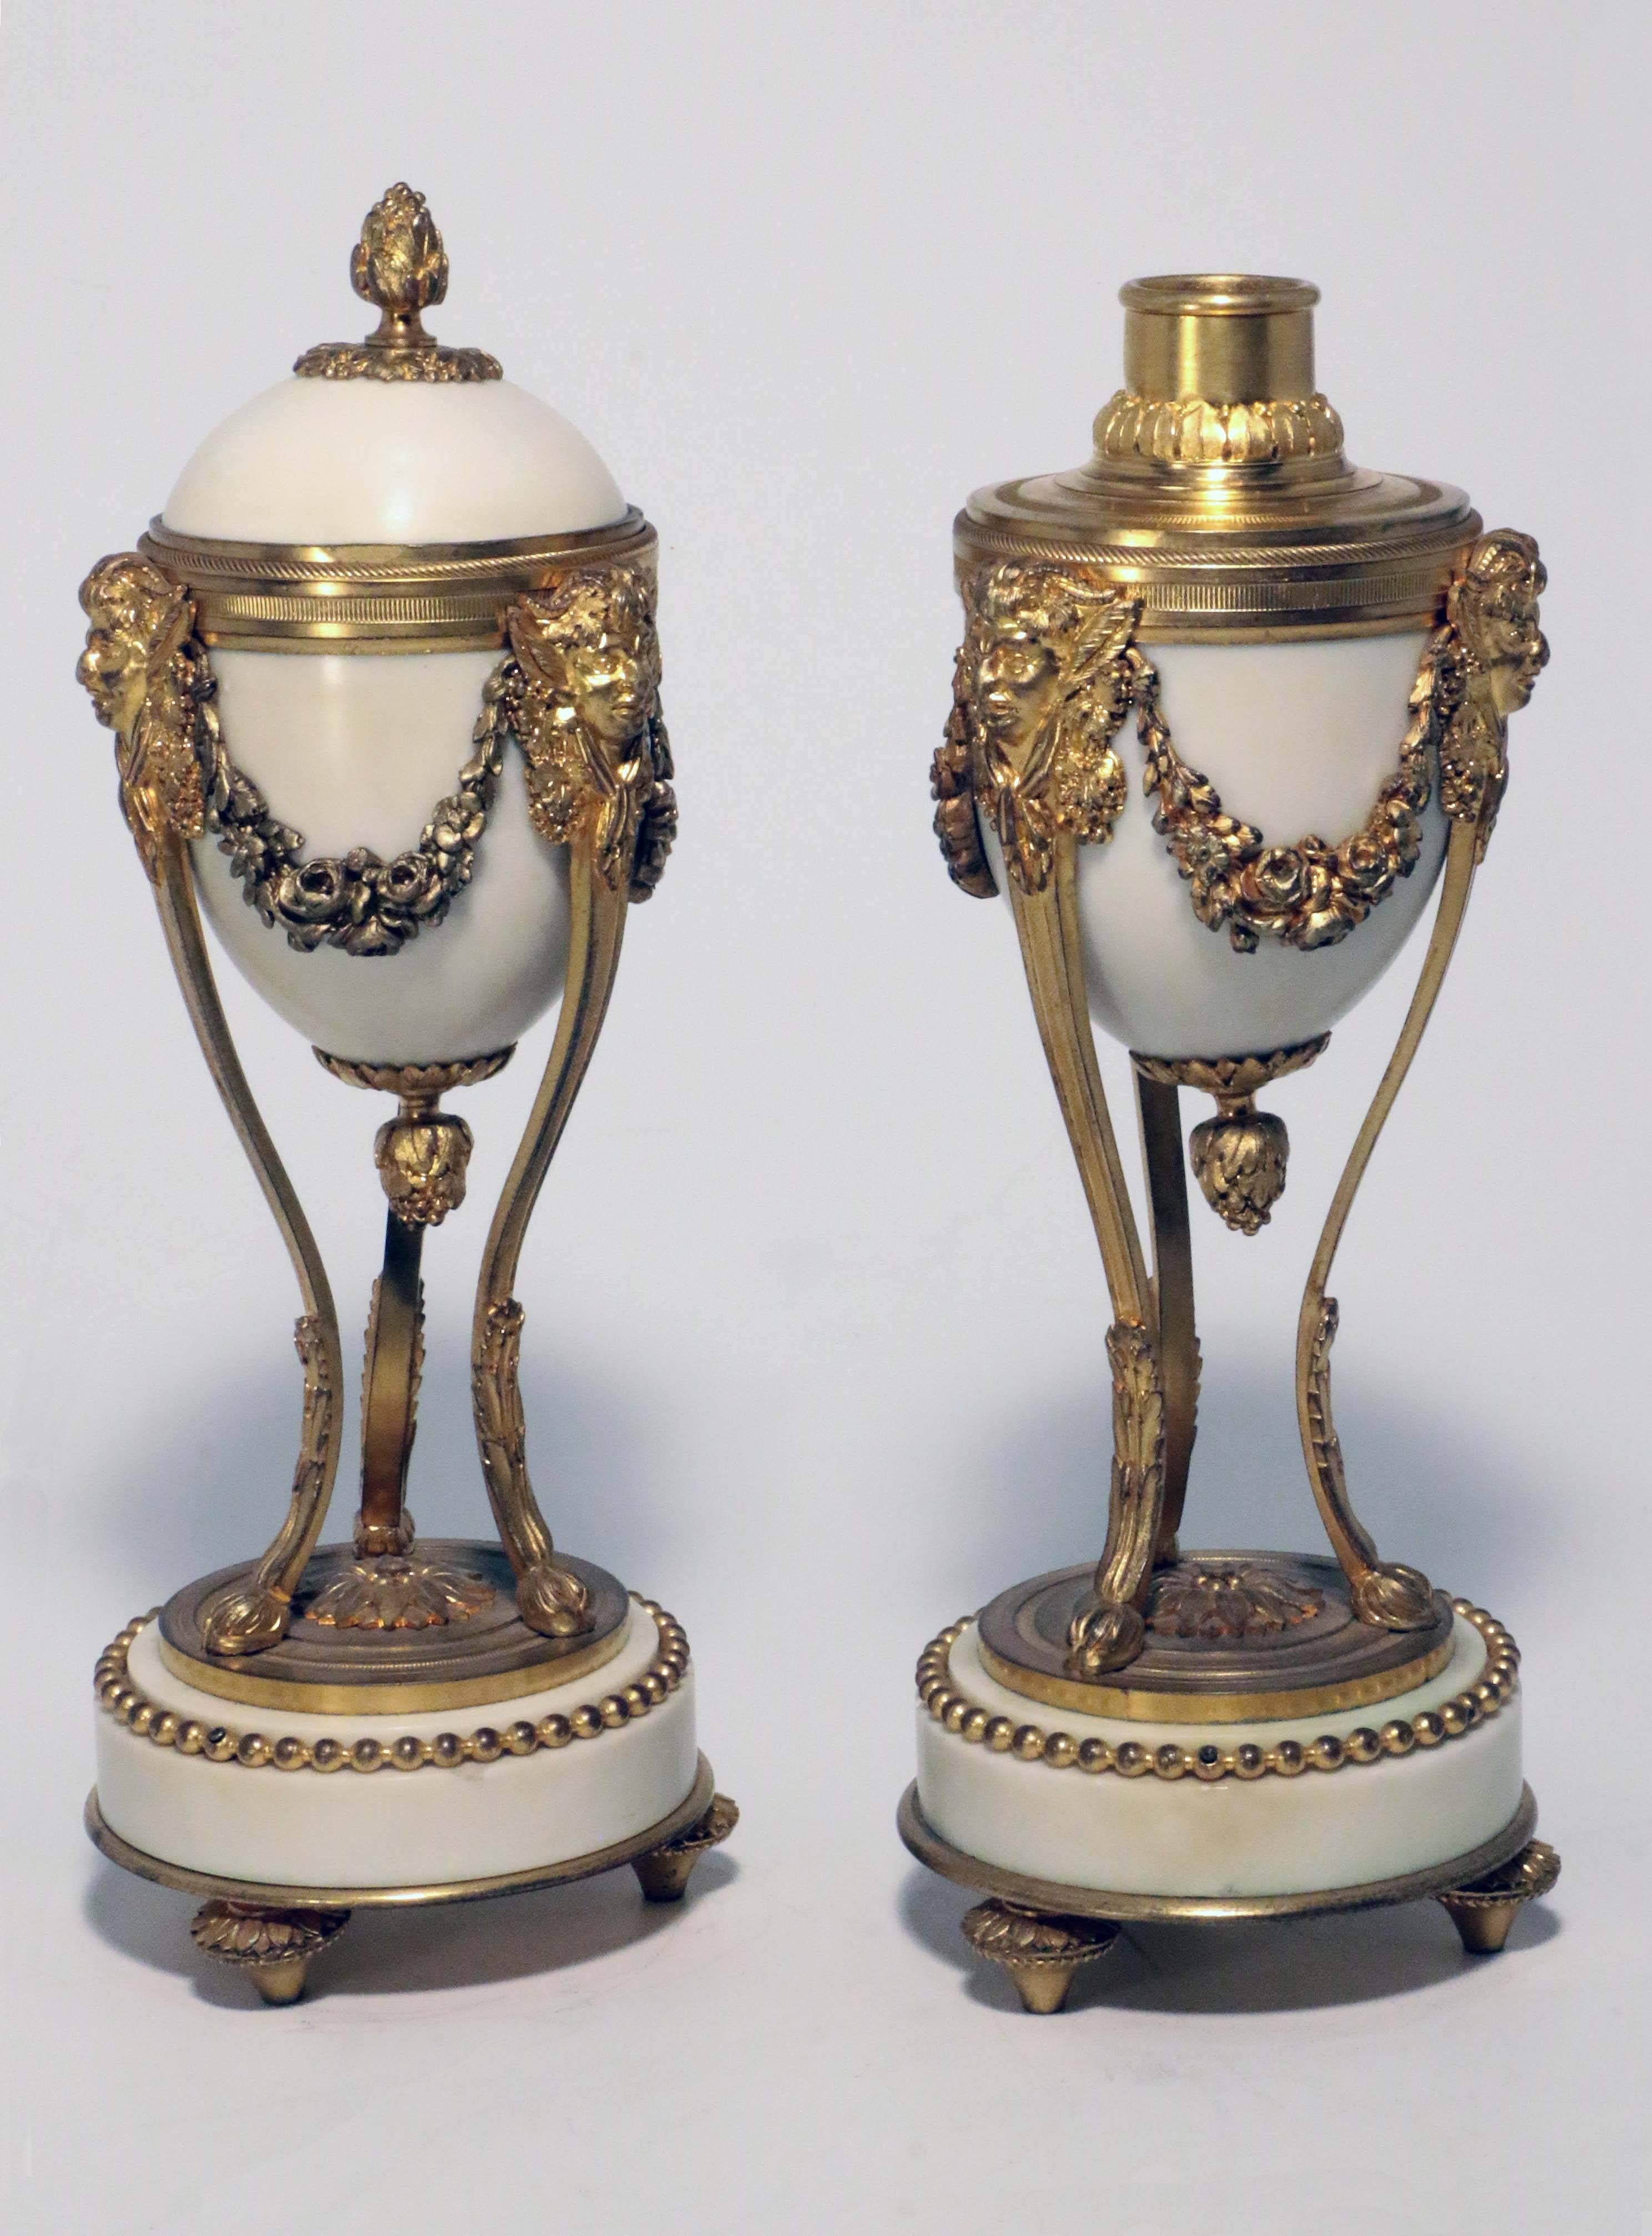 Each egg-shaped marble body mounted in gilt bronze and on a stand formed as masks of the young Silenus linked by garlands, and raised on three slender supports on beaded marble platform base and toupie feet. The domed cover reset upside down reveals